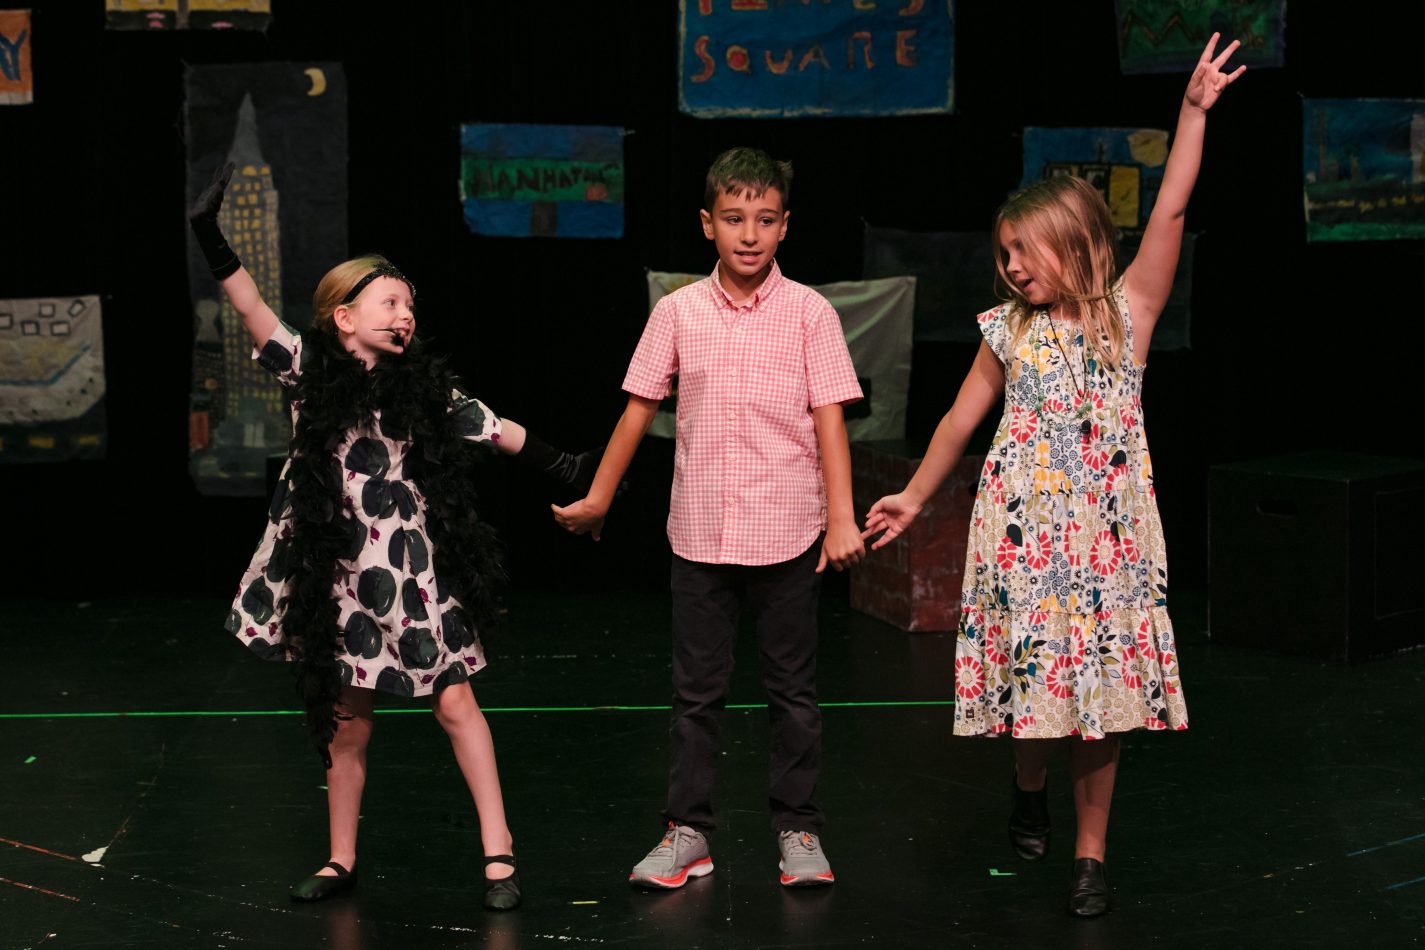 Gallery 2 - Winter and Spring Drama Classes